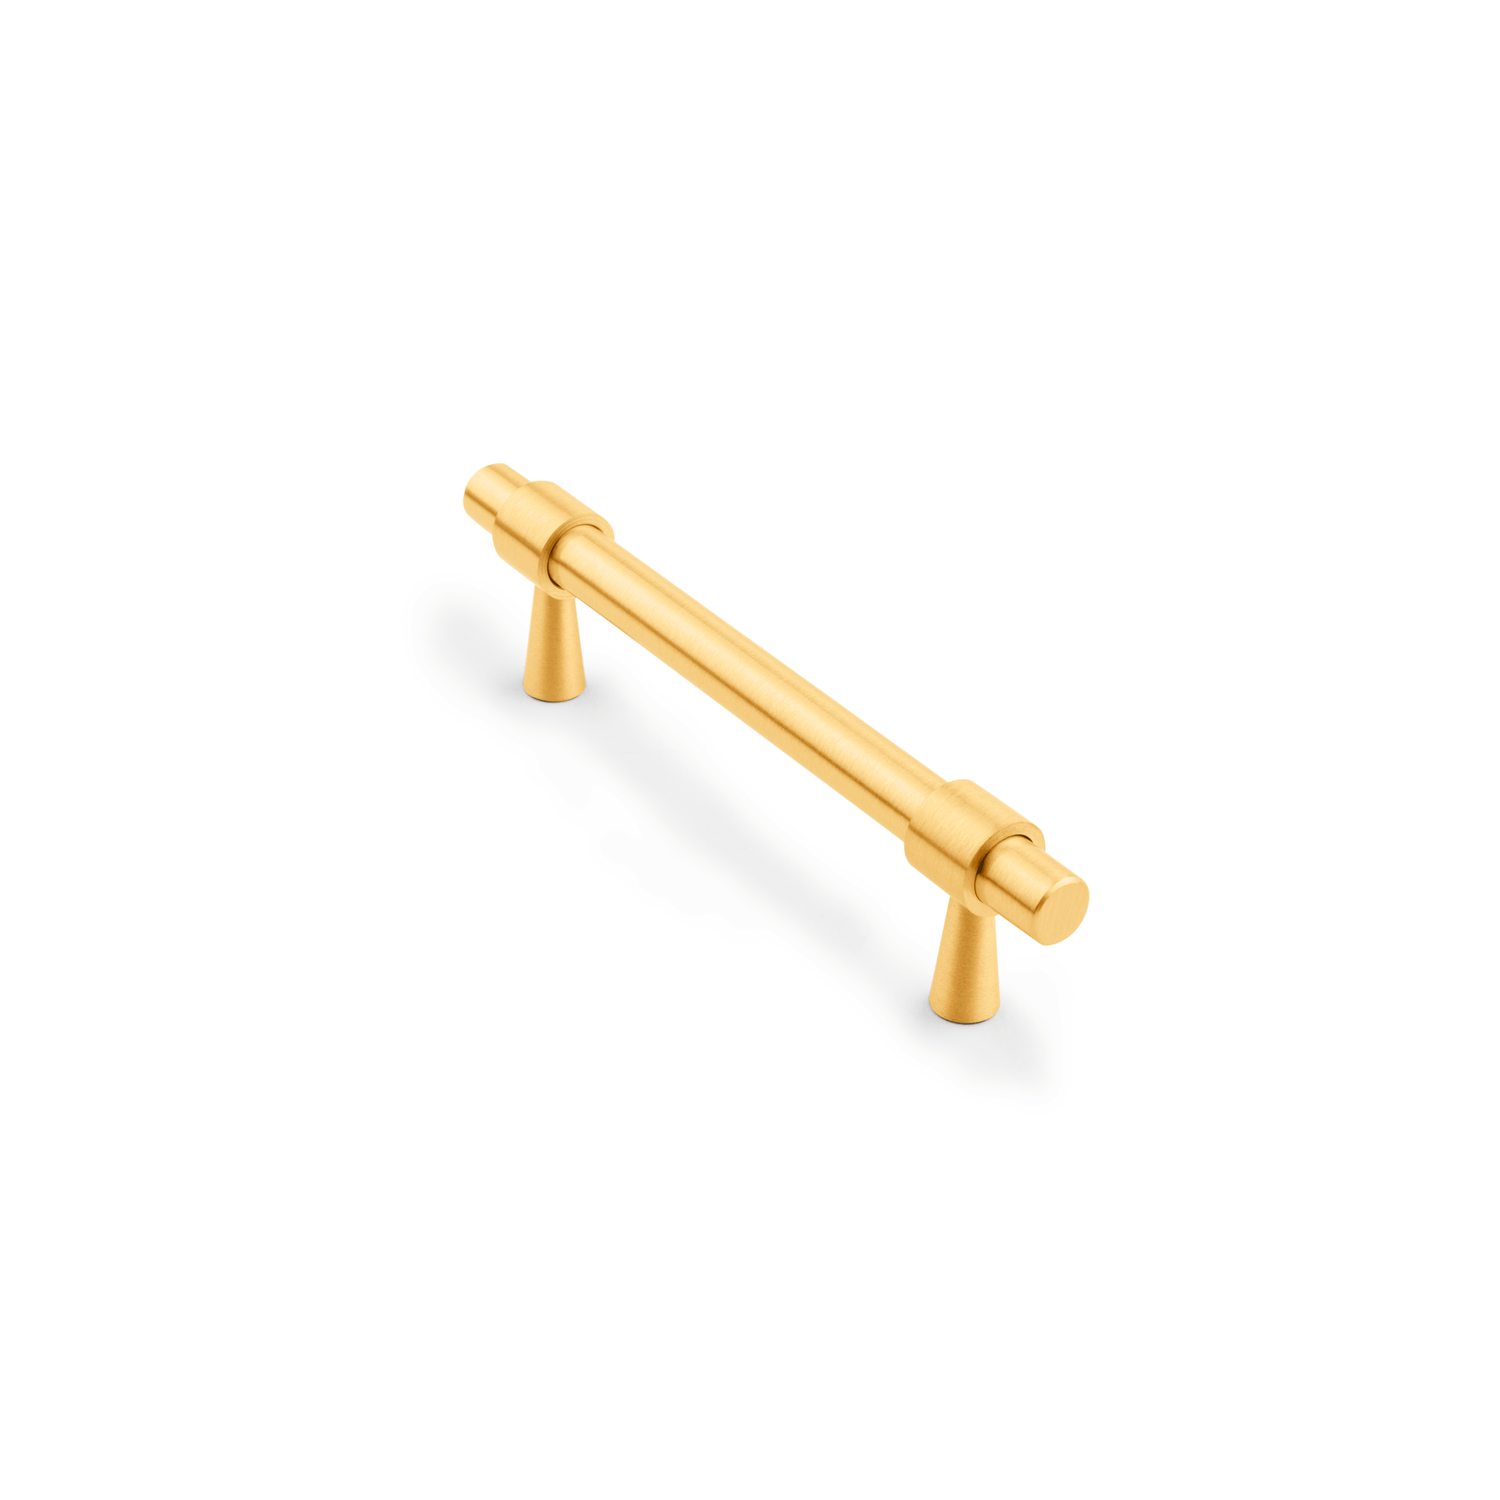 Seraphine Handle Handles 200mm / Gold / Brass - M A N T A R A